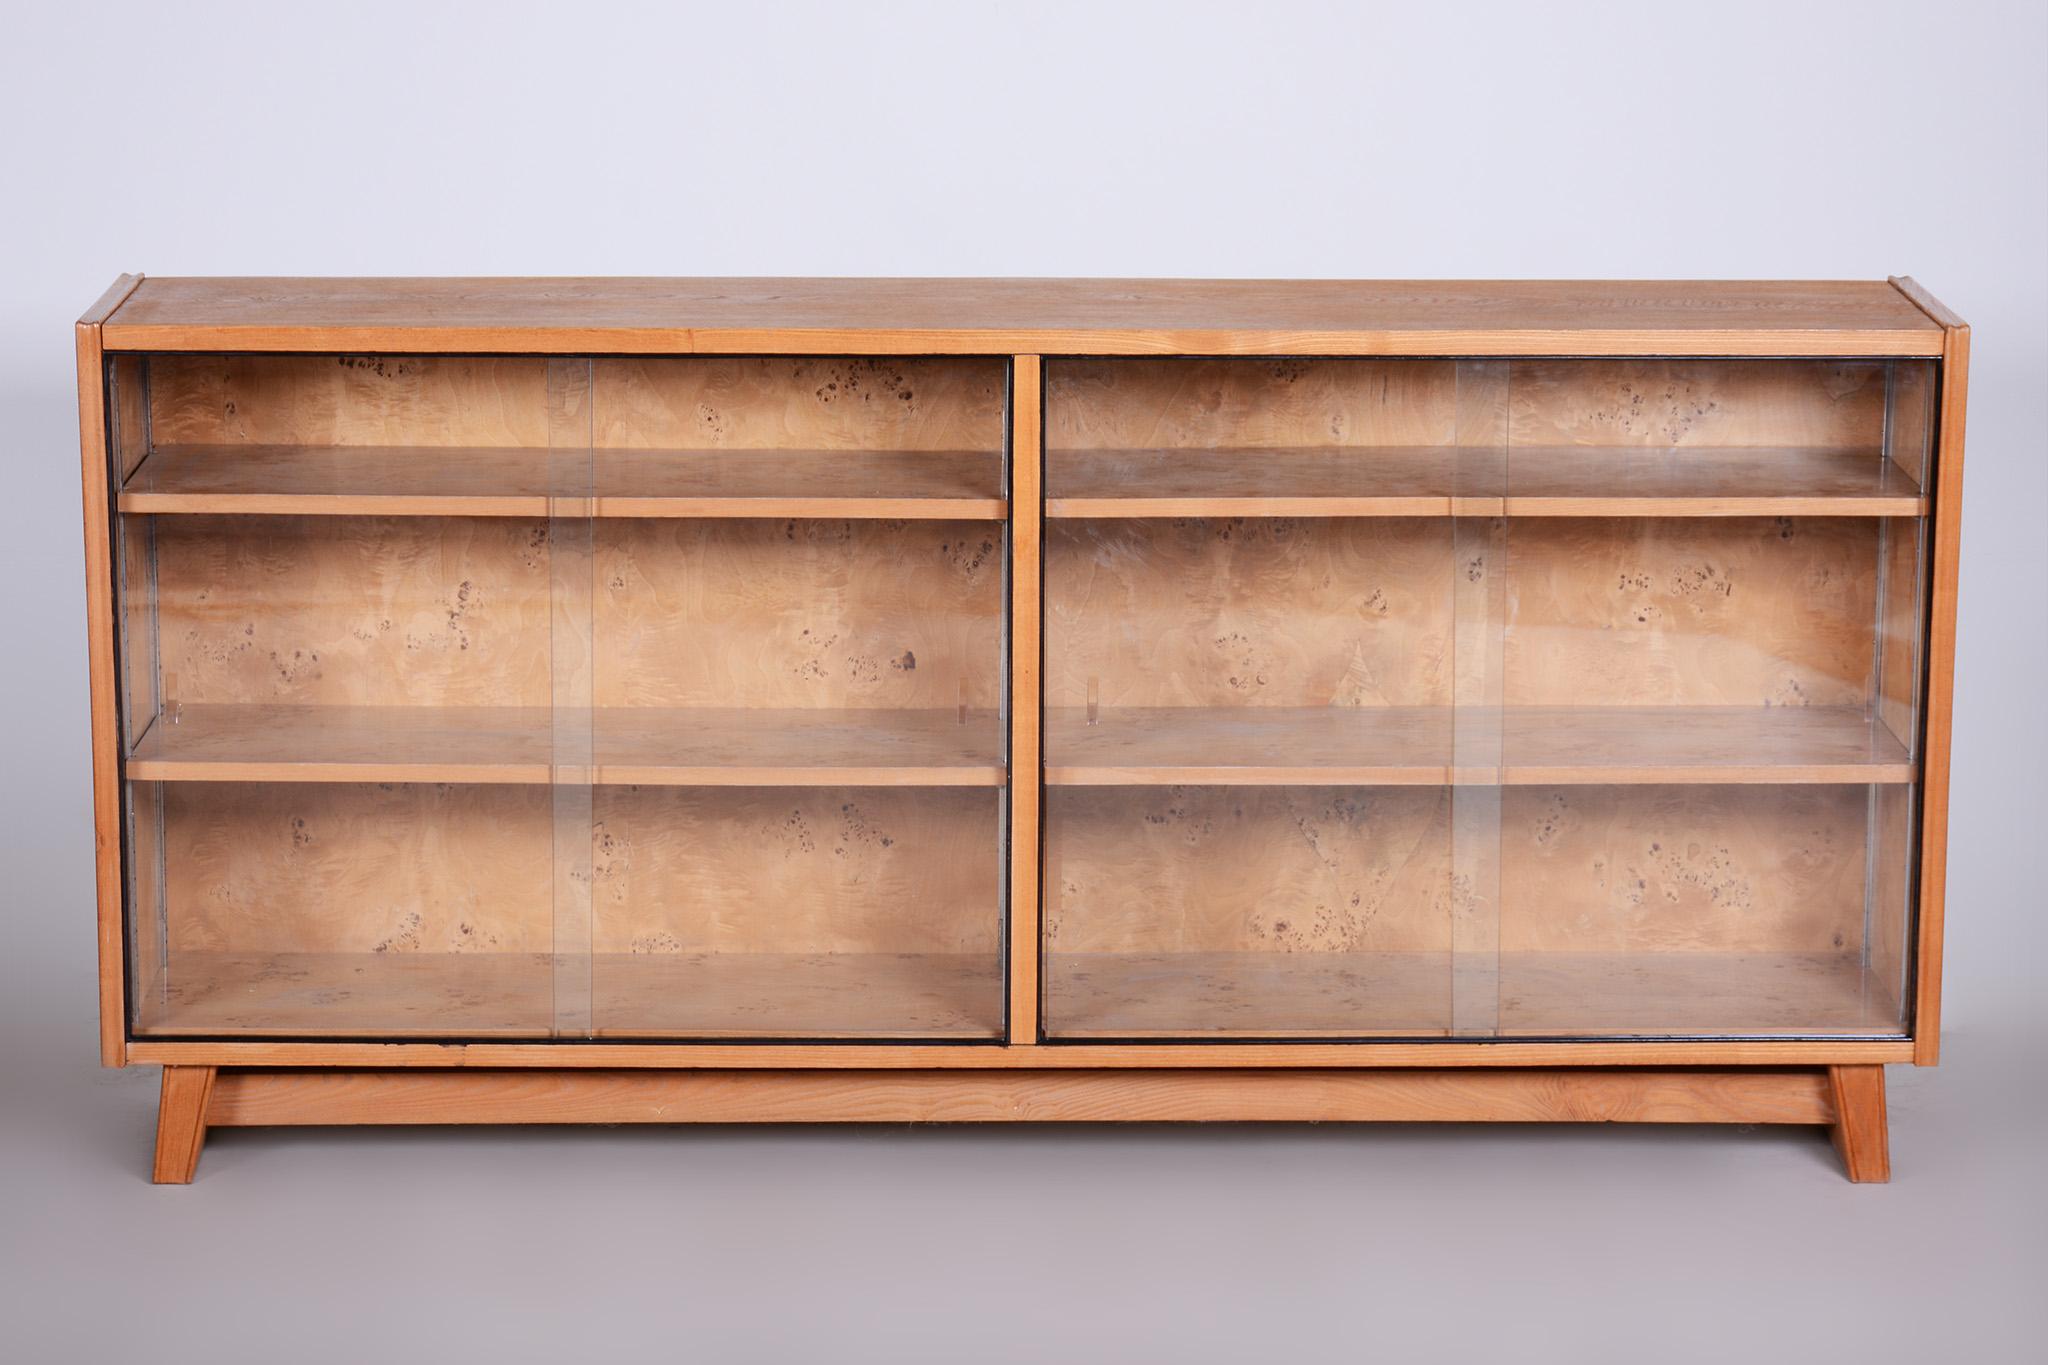 The cabinet has been fully restored by our professional refurbishing team in Czechia according to the original process. 

Sold individually. 

This item features classic Mid-Century Modern (MCM) design elements. Elements of MCM interior design